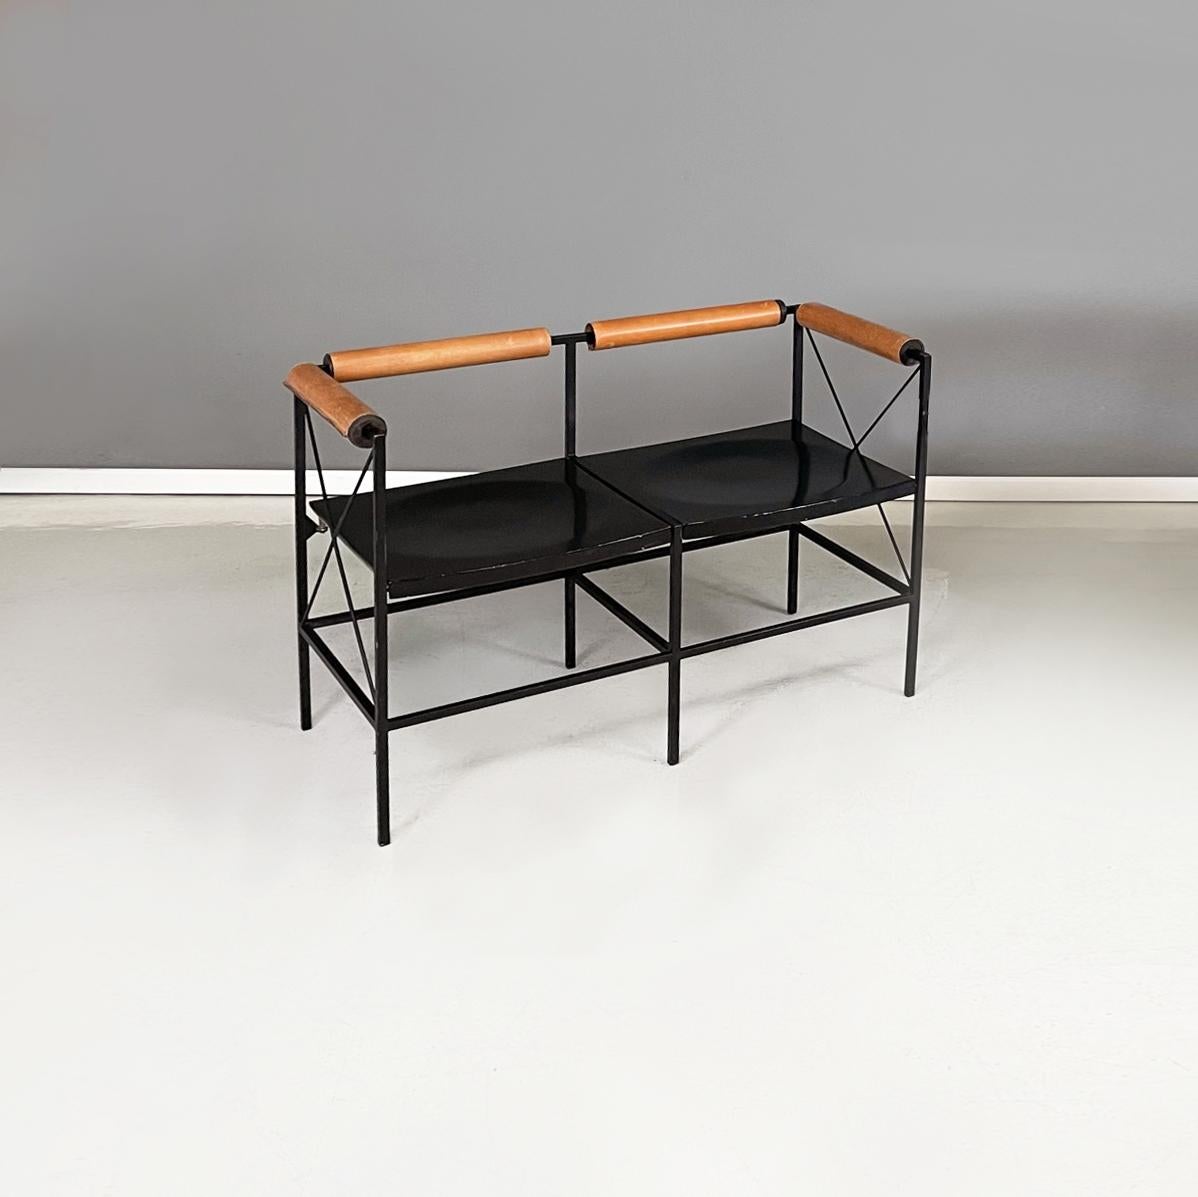 Italian modern black metal wood brown leather two-seater benches by Felicerossi, 1980s
Pair of two-seater benches with rectangular seat in black painted wood. The structure of the bench is entirely in black painted metal, with a X's in metal rod on